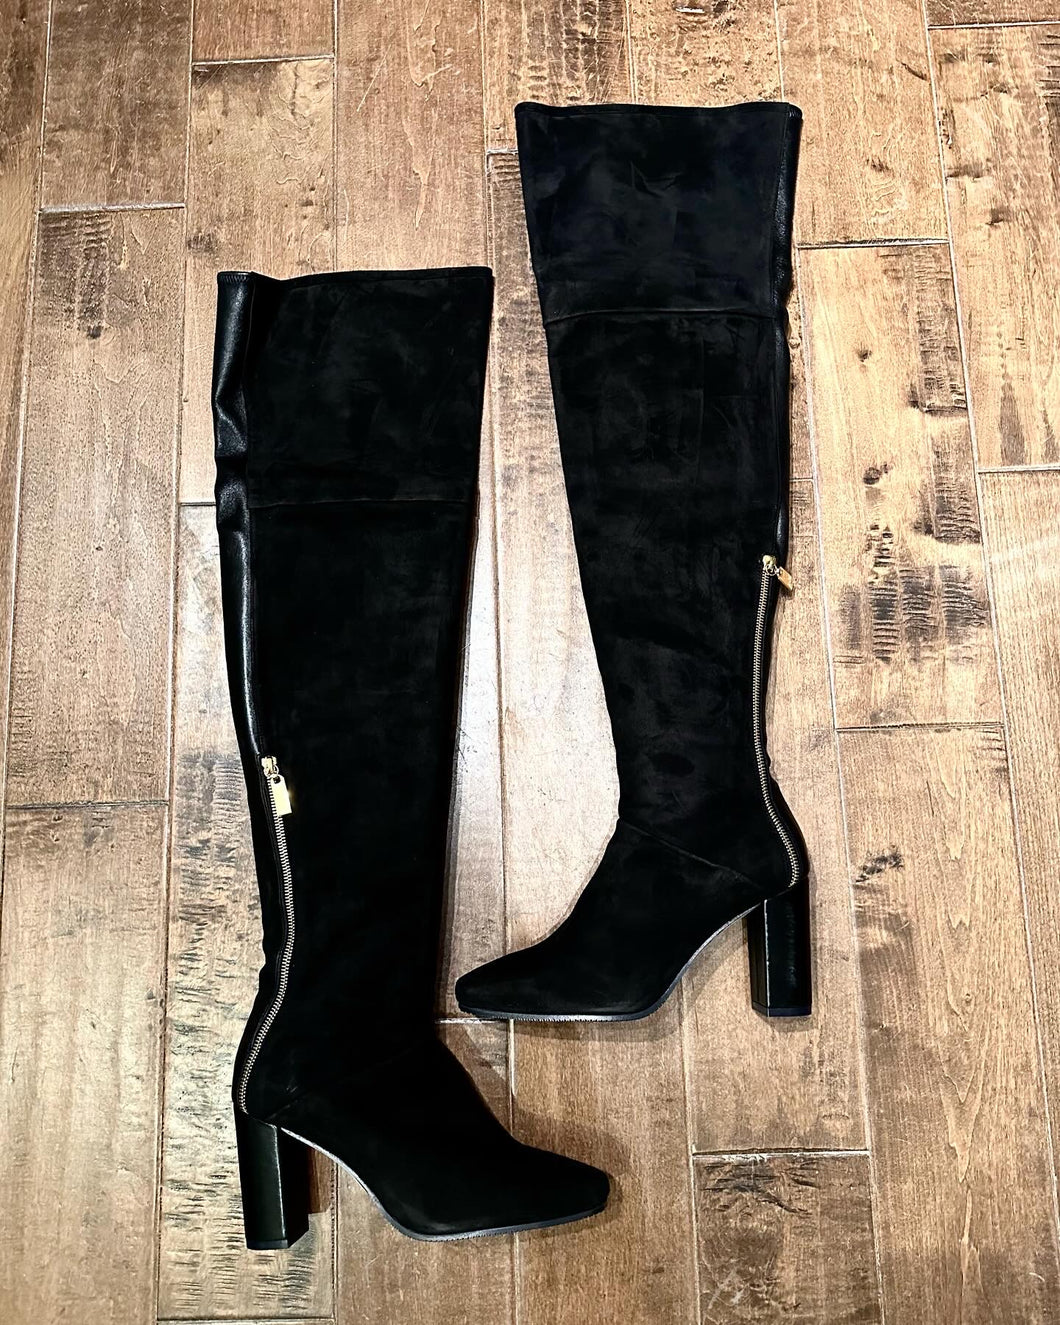 STUART WEITZMAN Suede Leather Over The Knee Thigh High Boots